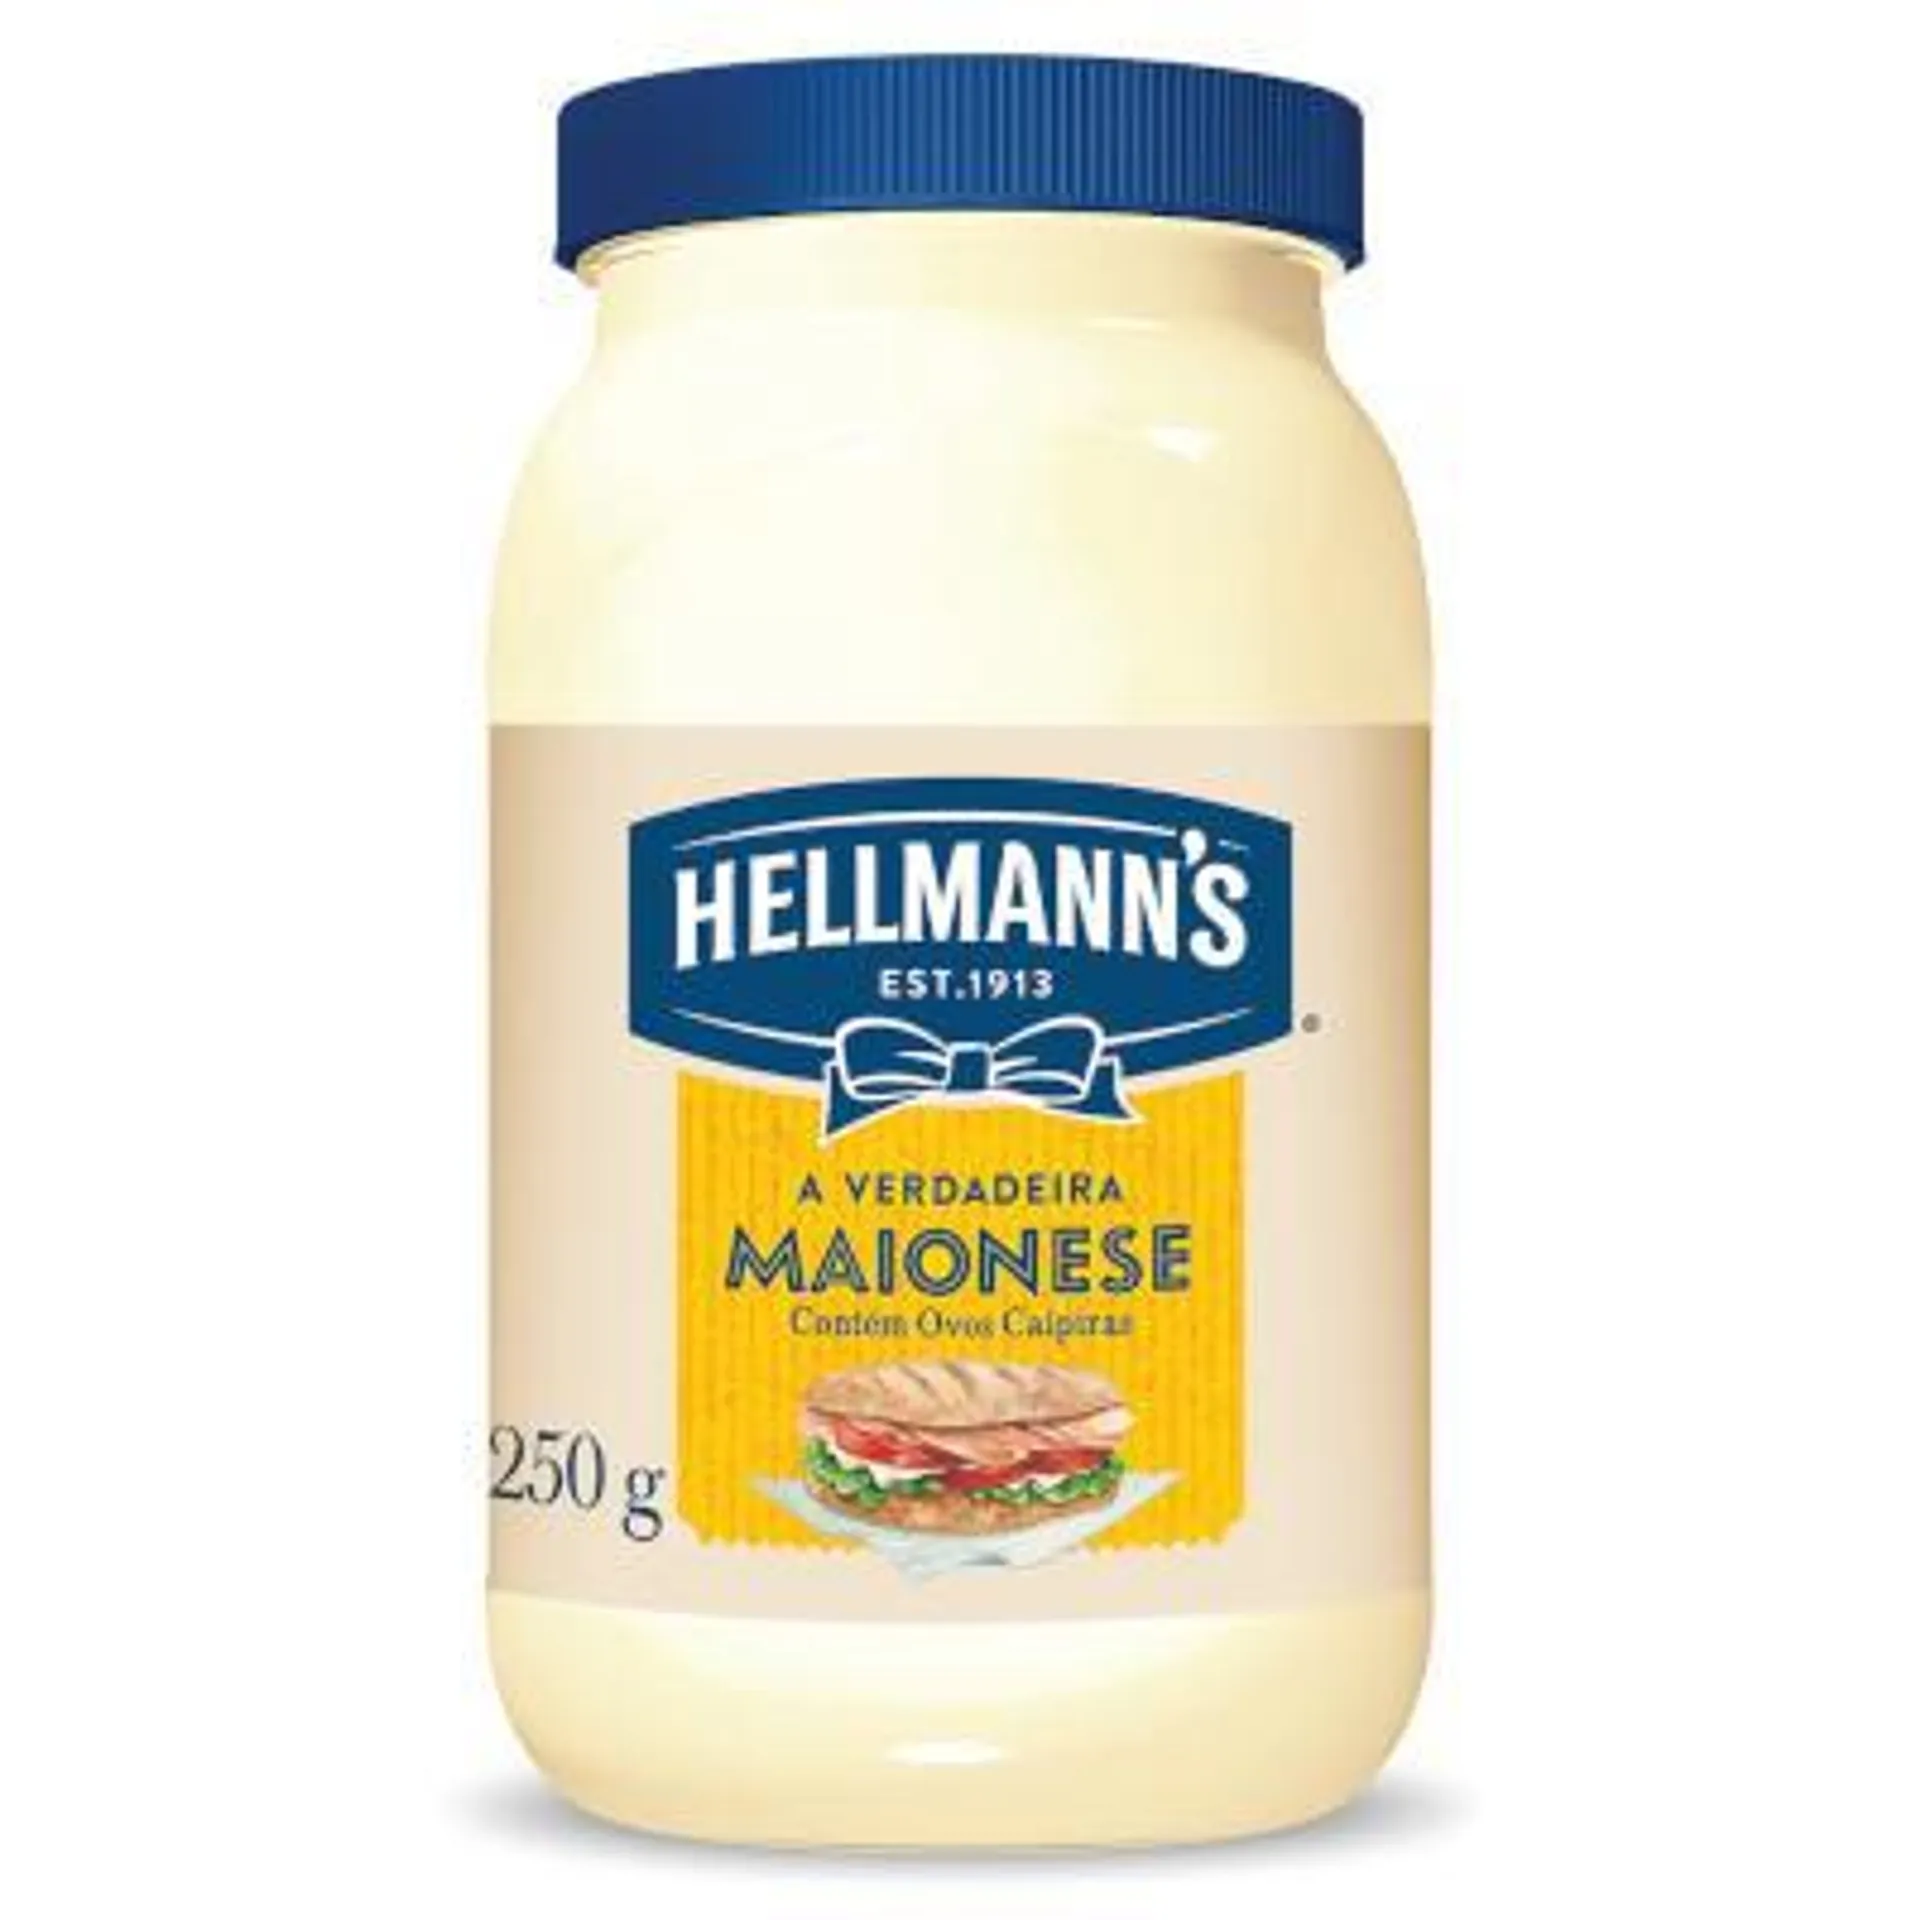 Maionese pote 250g - Hellmann's